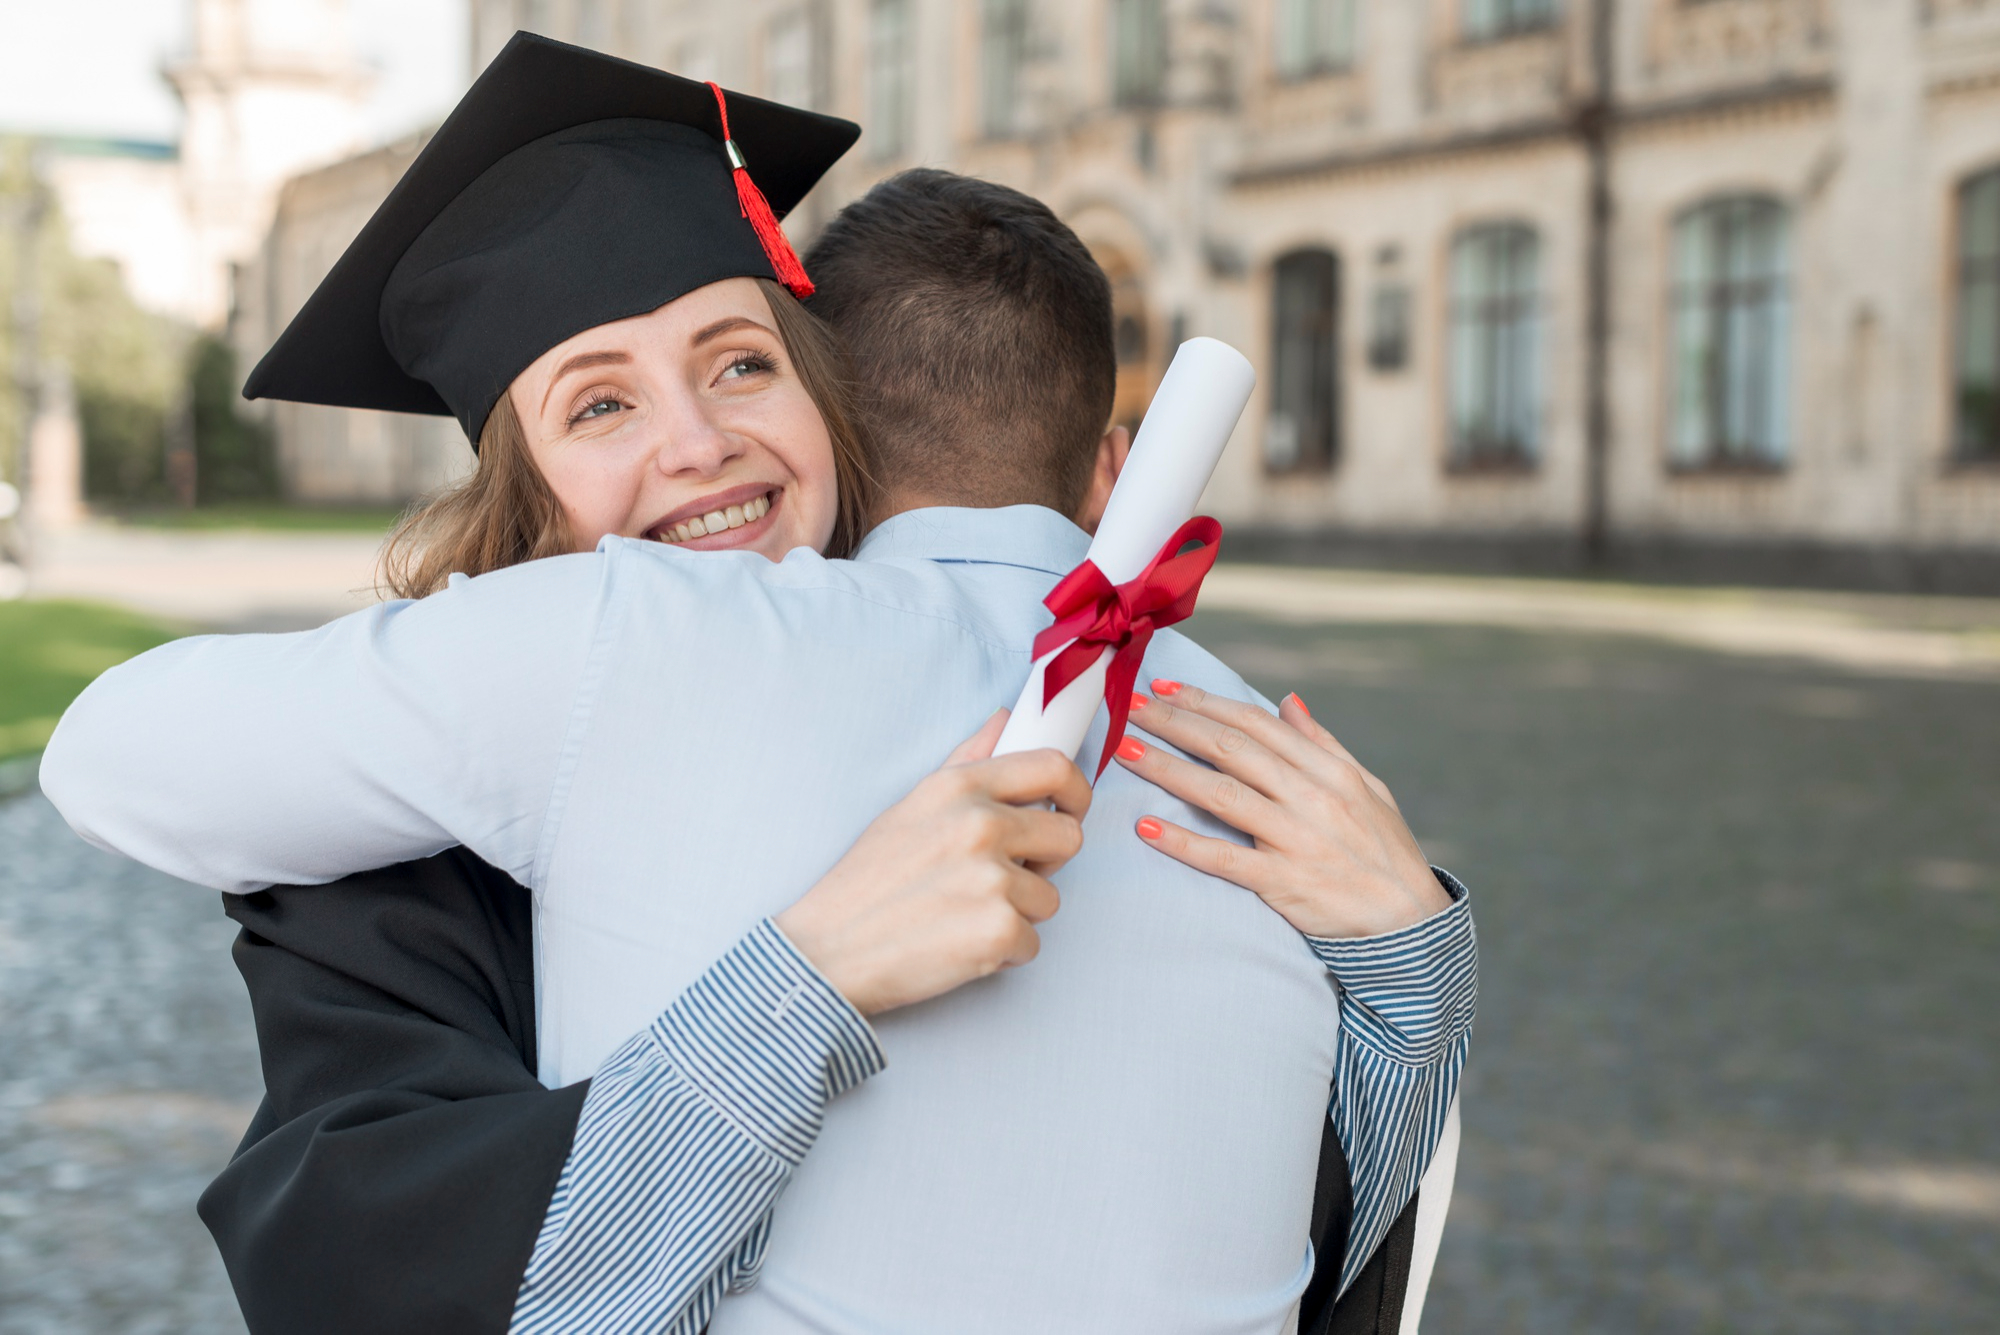 A happy female college graduate being embraced by a man | Source: Pexels